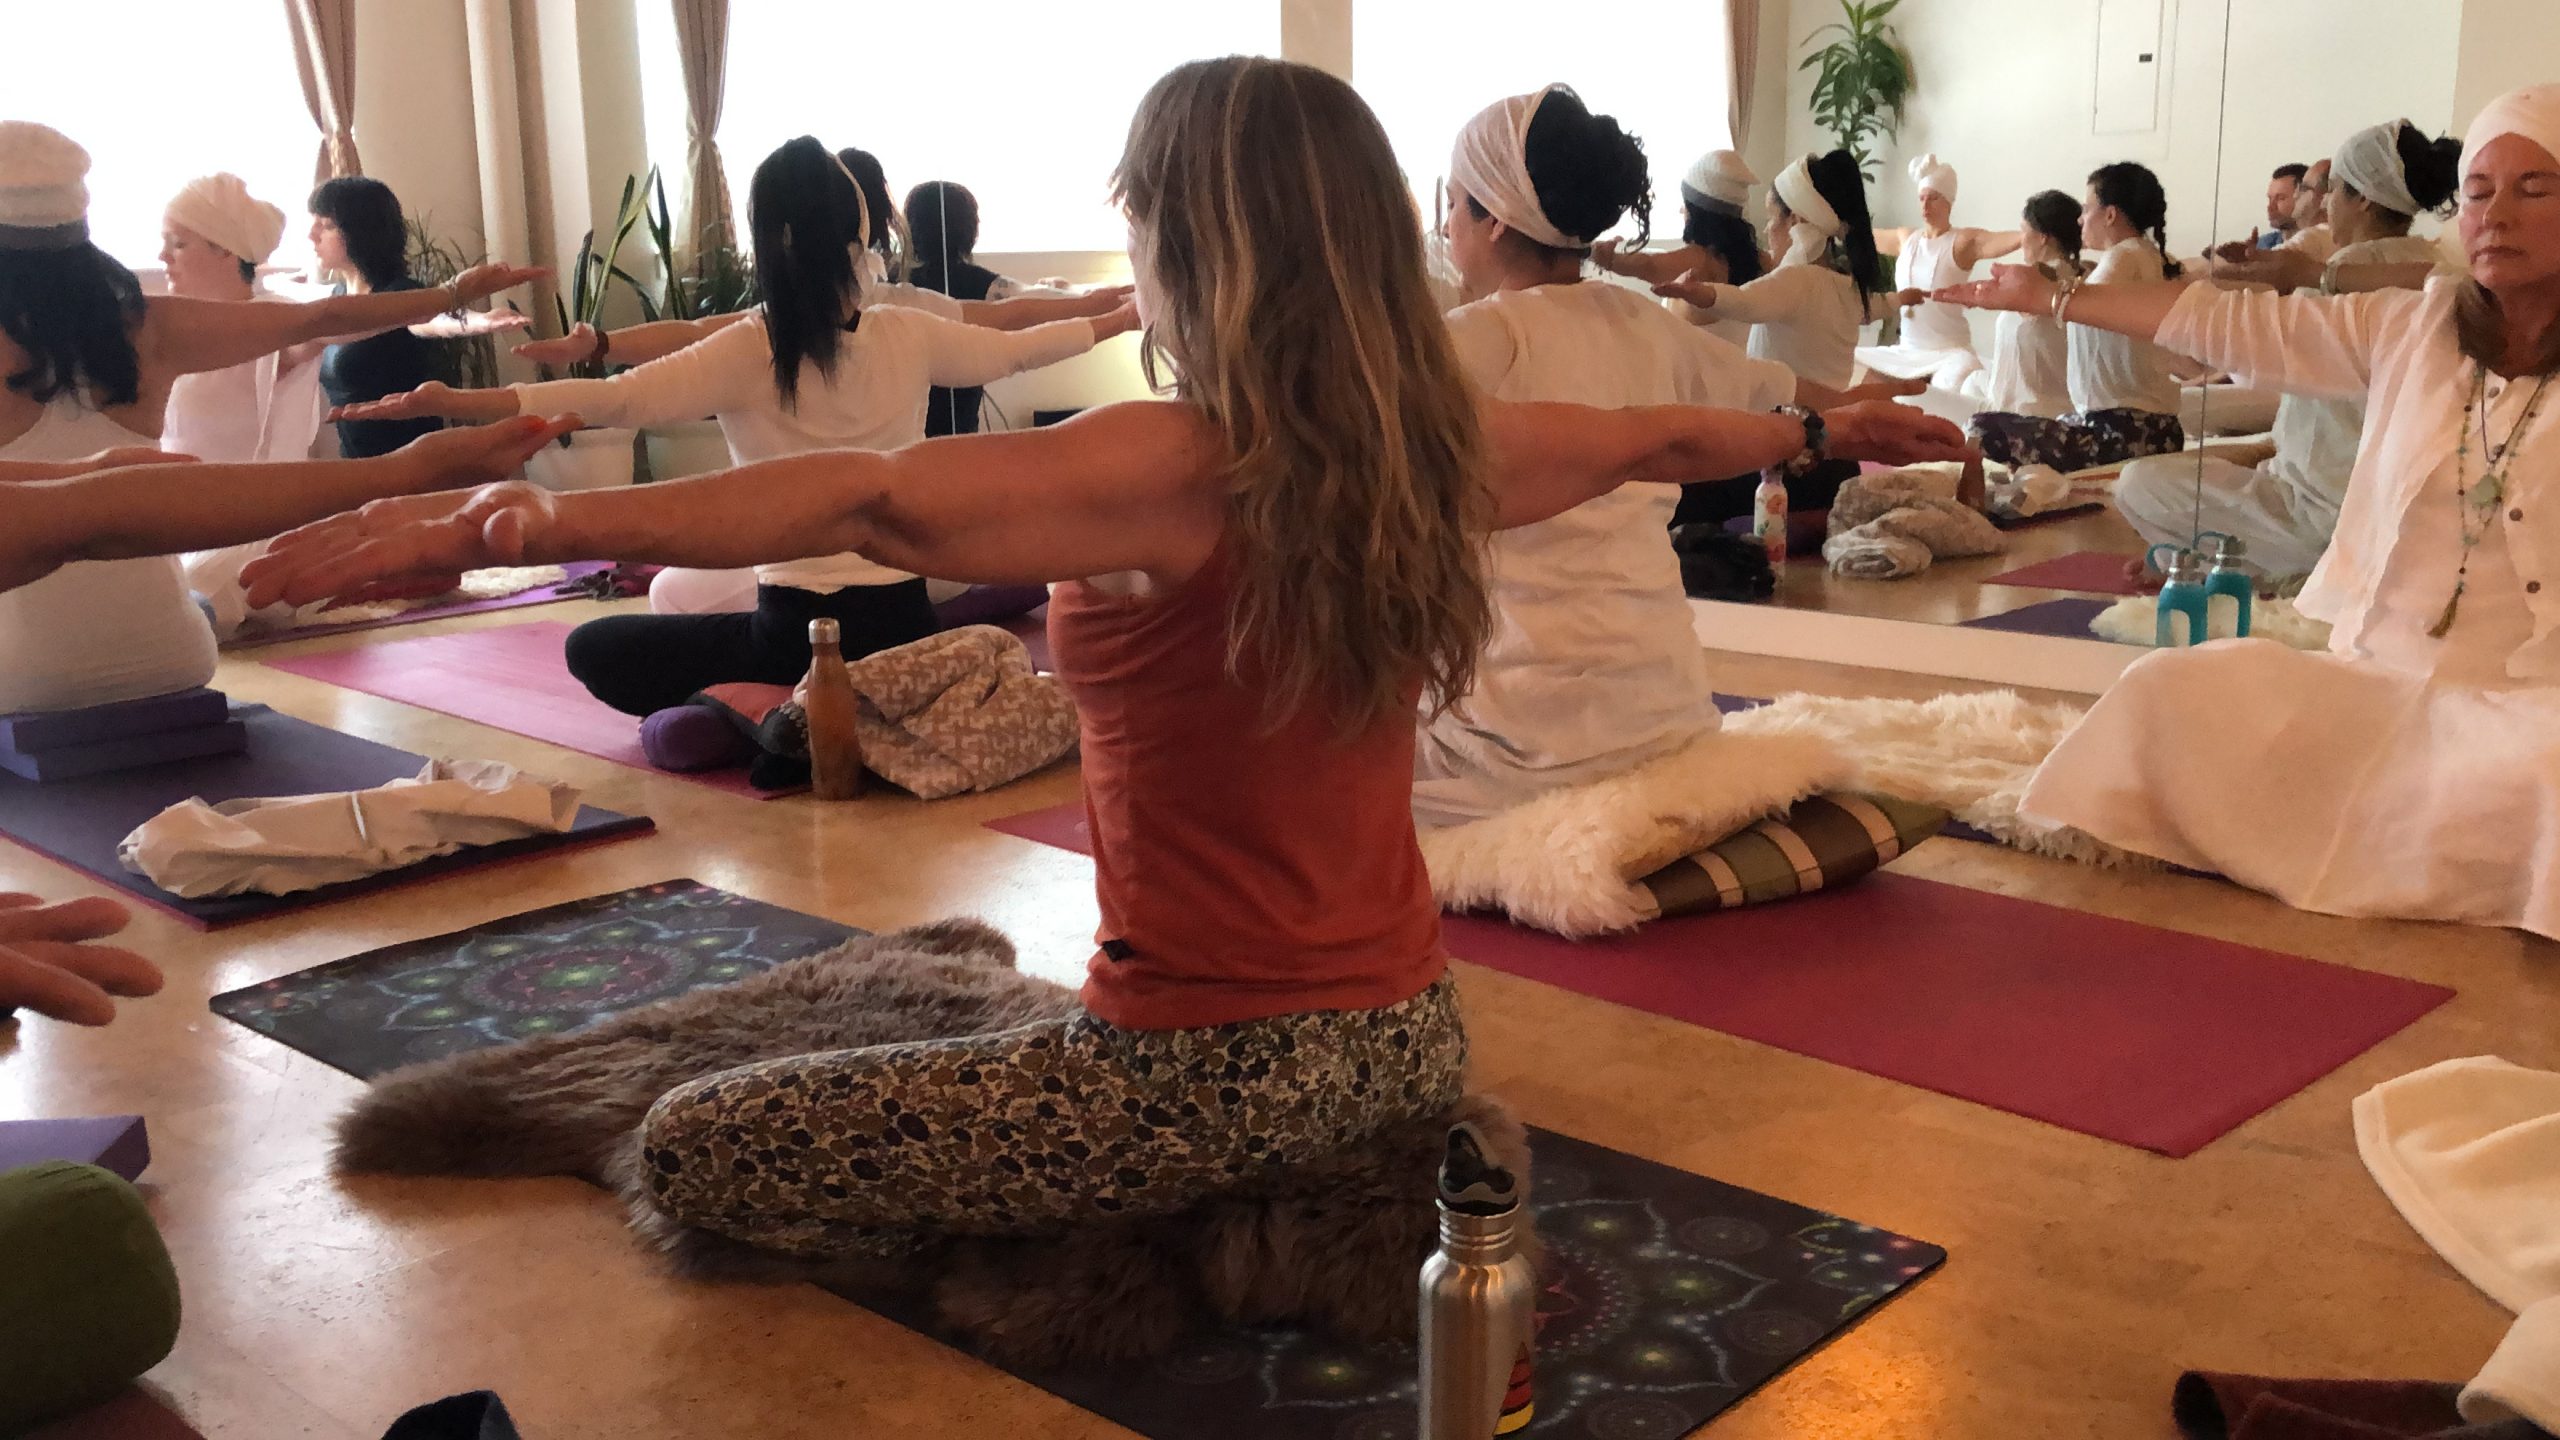 Kundalini Yoga Cairns - Sat Nam, I still have spaces left for this  Saturday's event at The Yoga School! 3-5pm $44. Direct message me to secure  your space 😊 Kundalini Yoga is